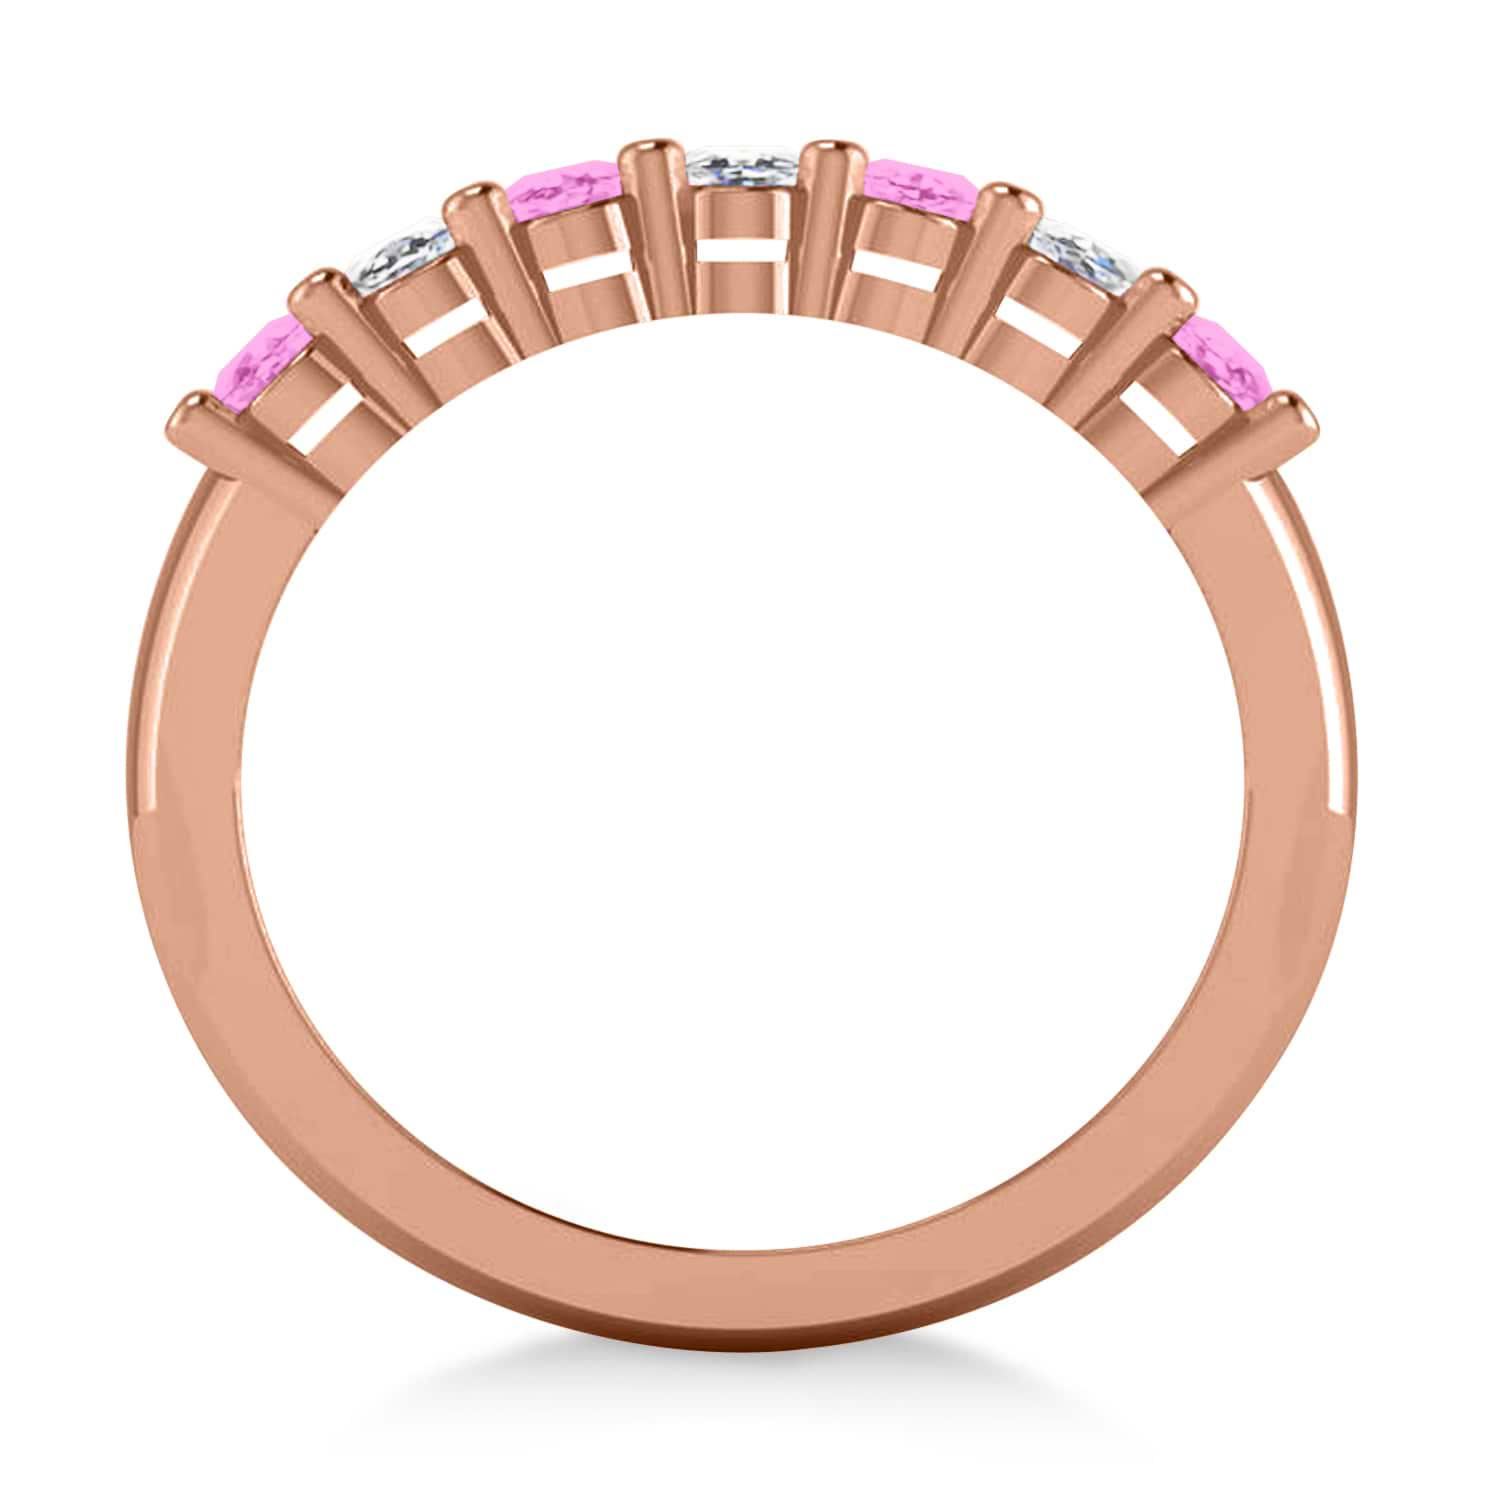 Oval Diamond & Pink Sapphire Seven Stone Ring 14k Rose Gold (1.40ct)